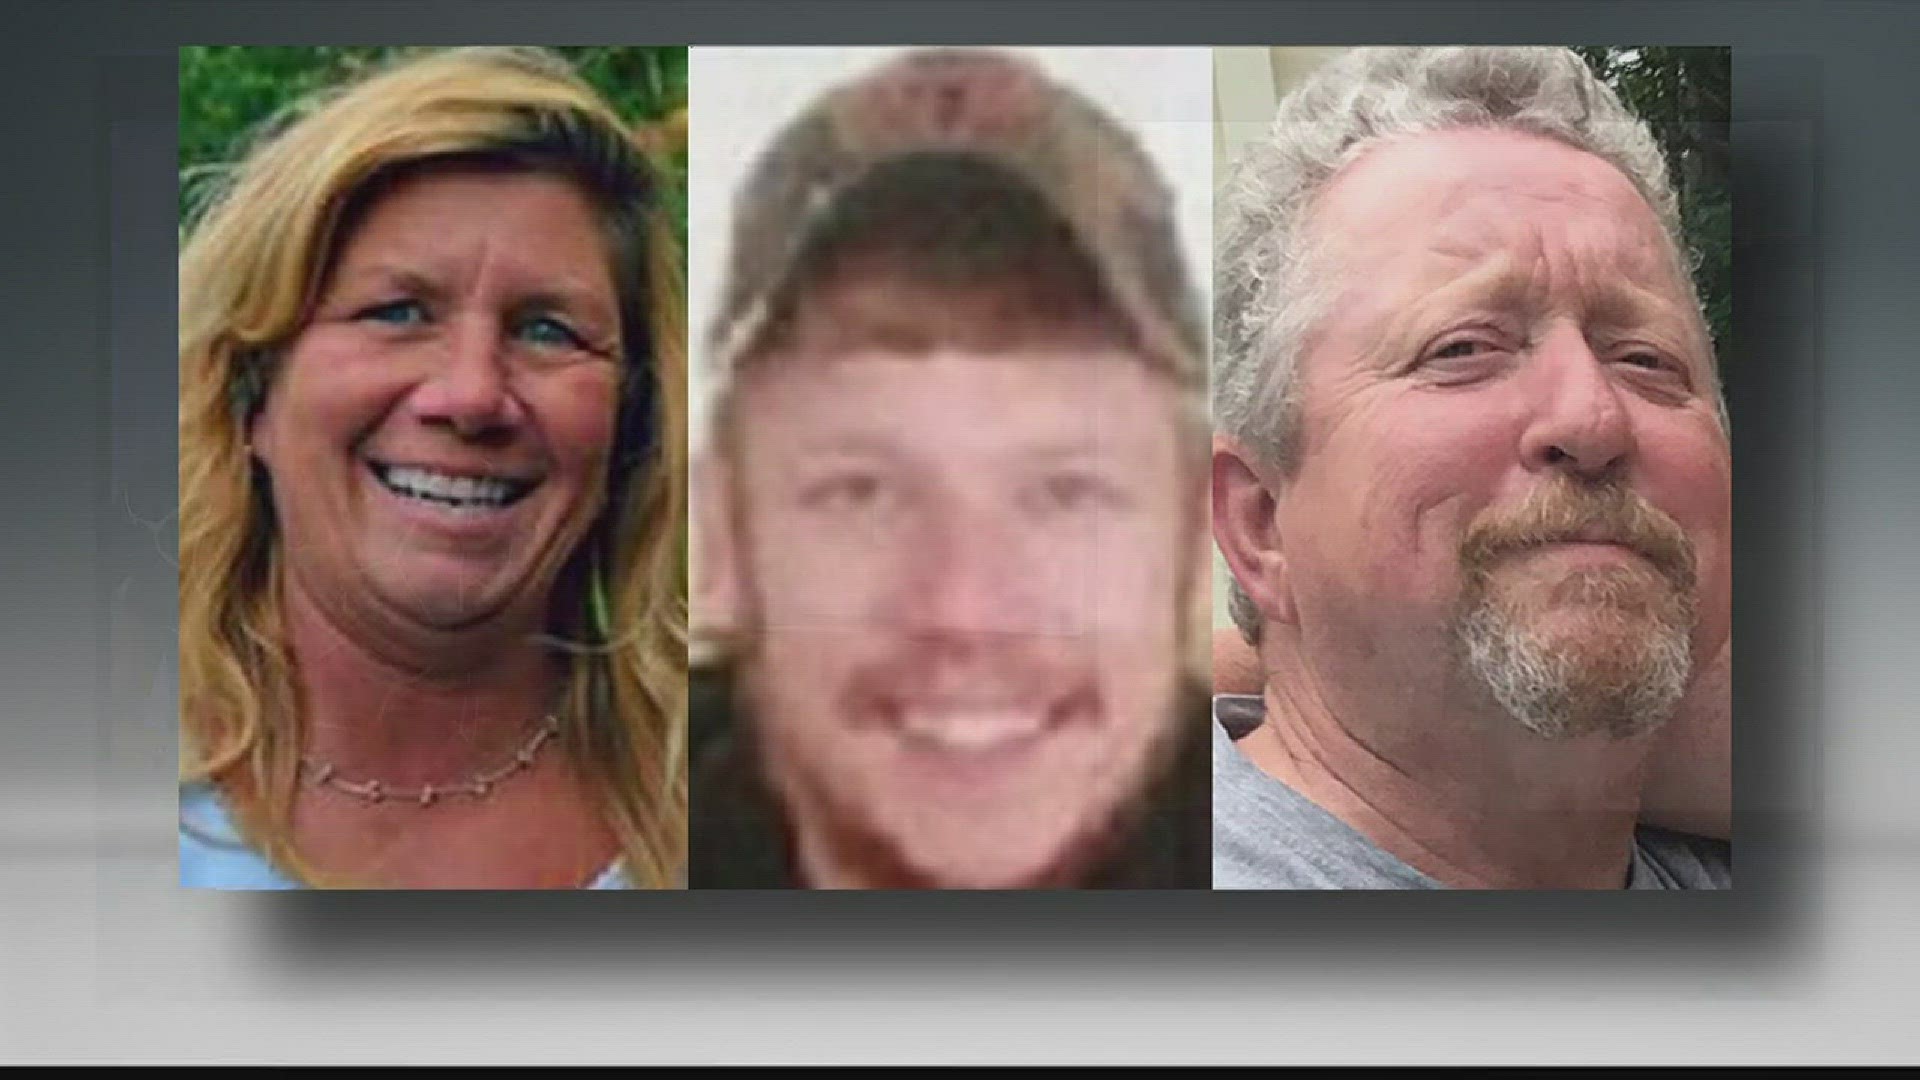 Family, friends of victims of Madison shootings share emotion